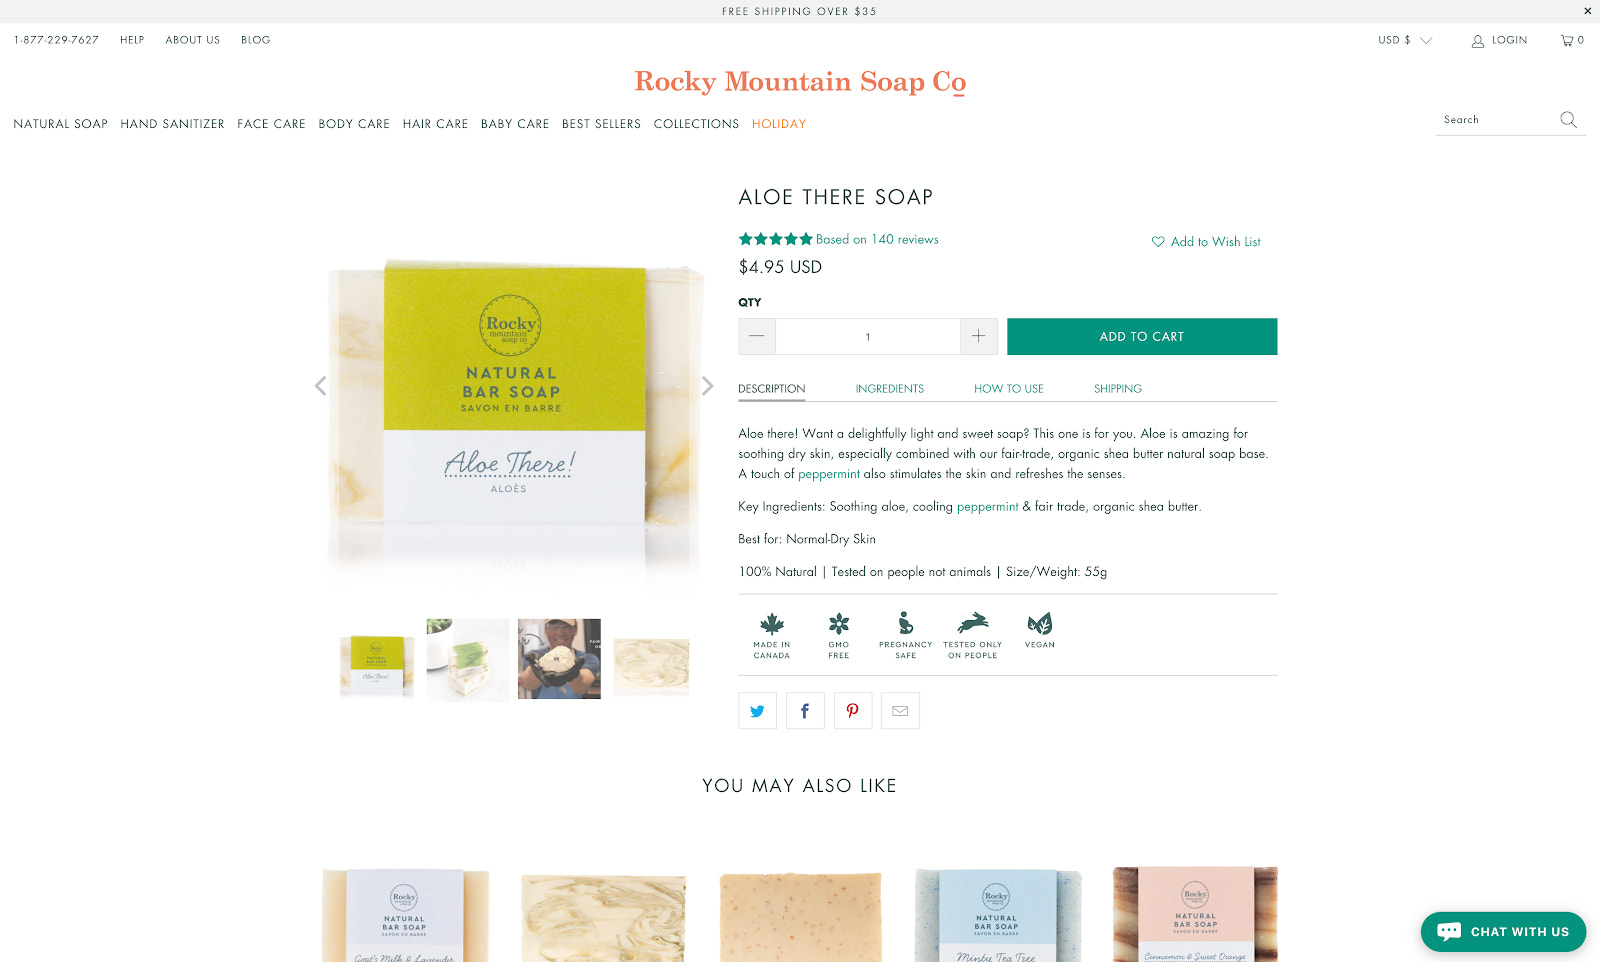 eCommerce Listings Pages - We Look At 10 Top Examples